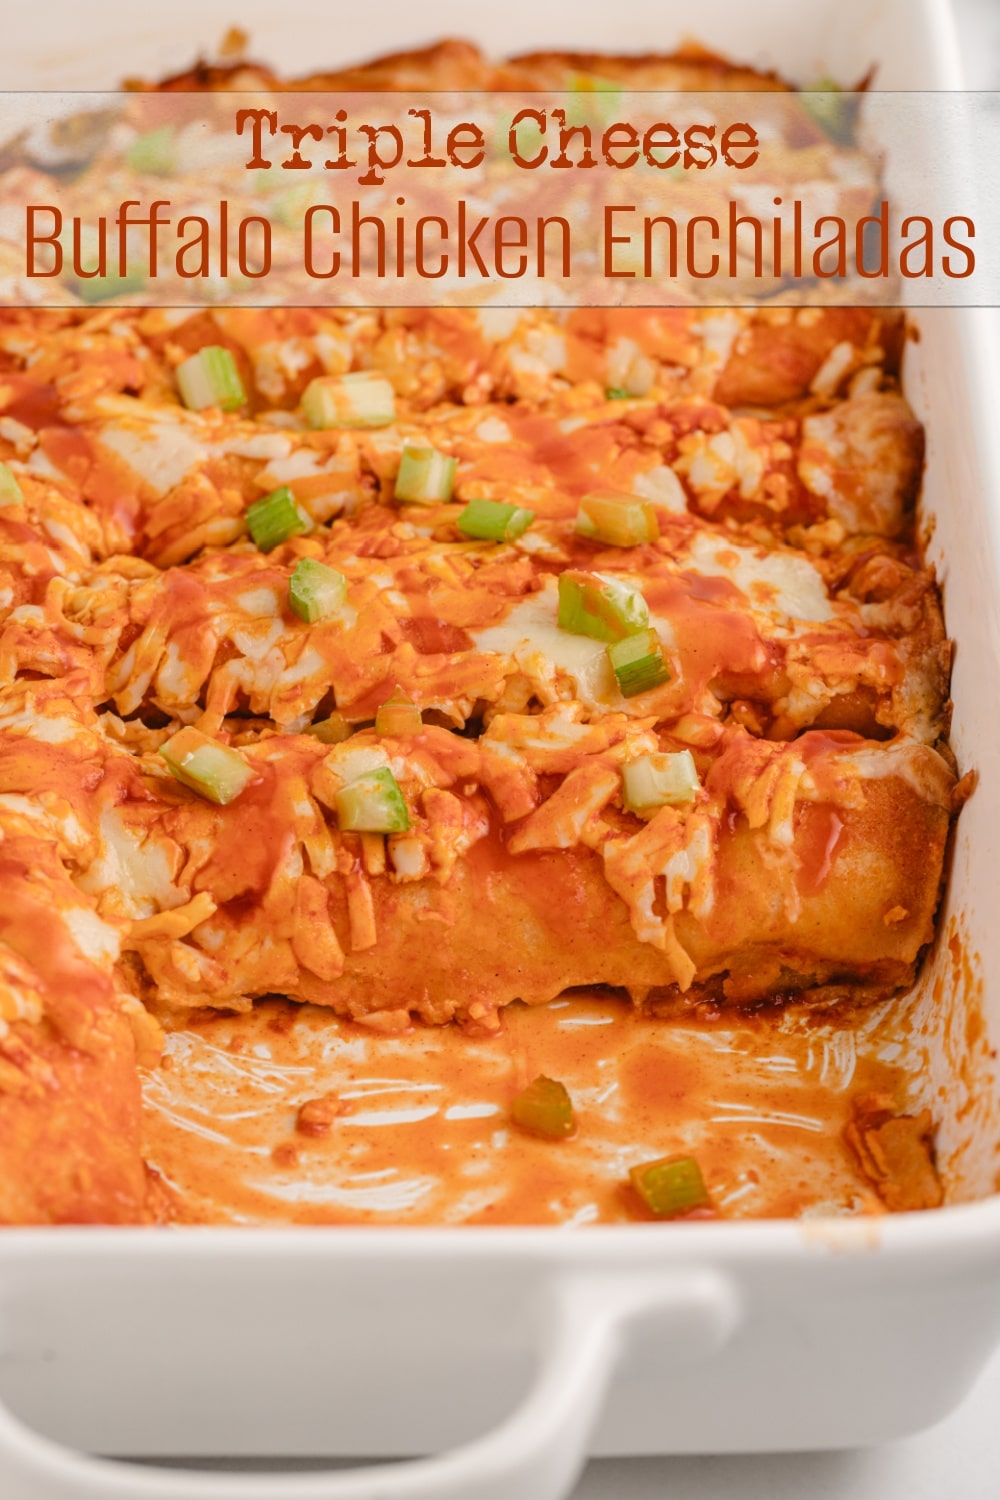 These buffalo chicken enchiladas are the creamiest, triple cheesy blend of fiery flavors, packed with shredded chicken, a zesty buffalo sauce, and lots of tortillas, all baked to perfection. Each bite delivers a punch of flavor that's downright addictive. This enchilada dinner is perfect for game day at home or for tailgating. They also make a great weeknight dinner. via @cmpollak1